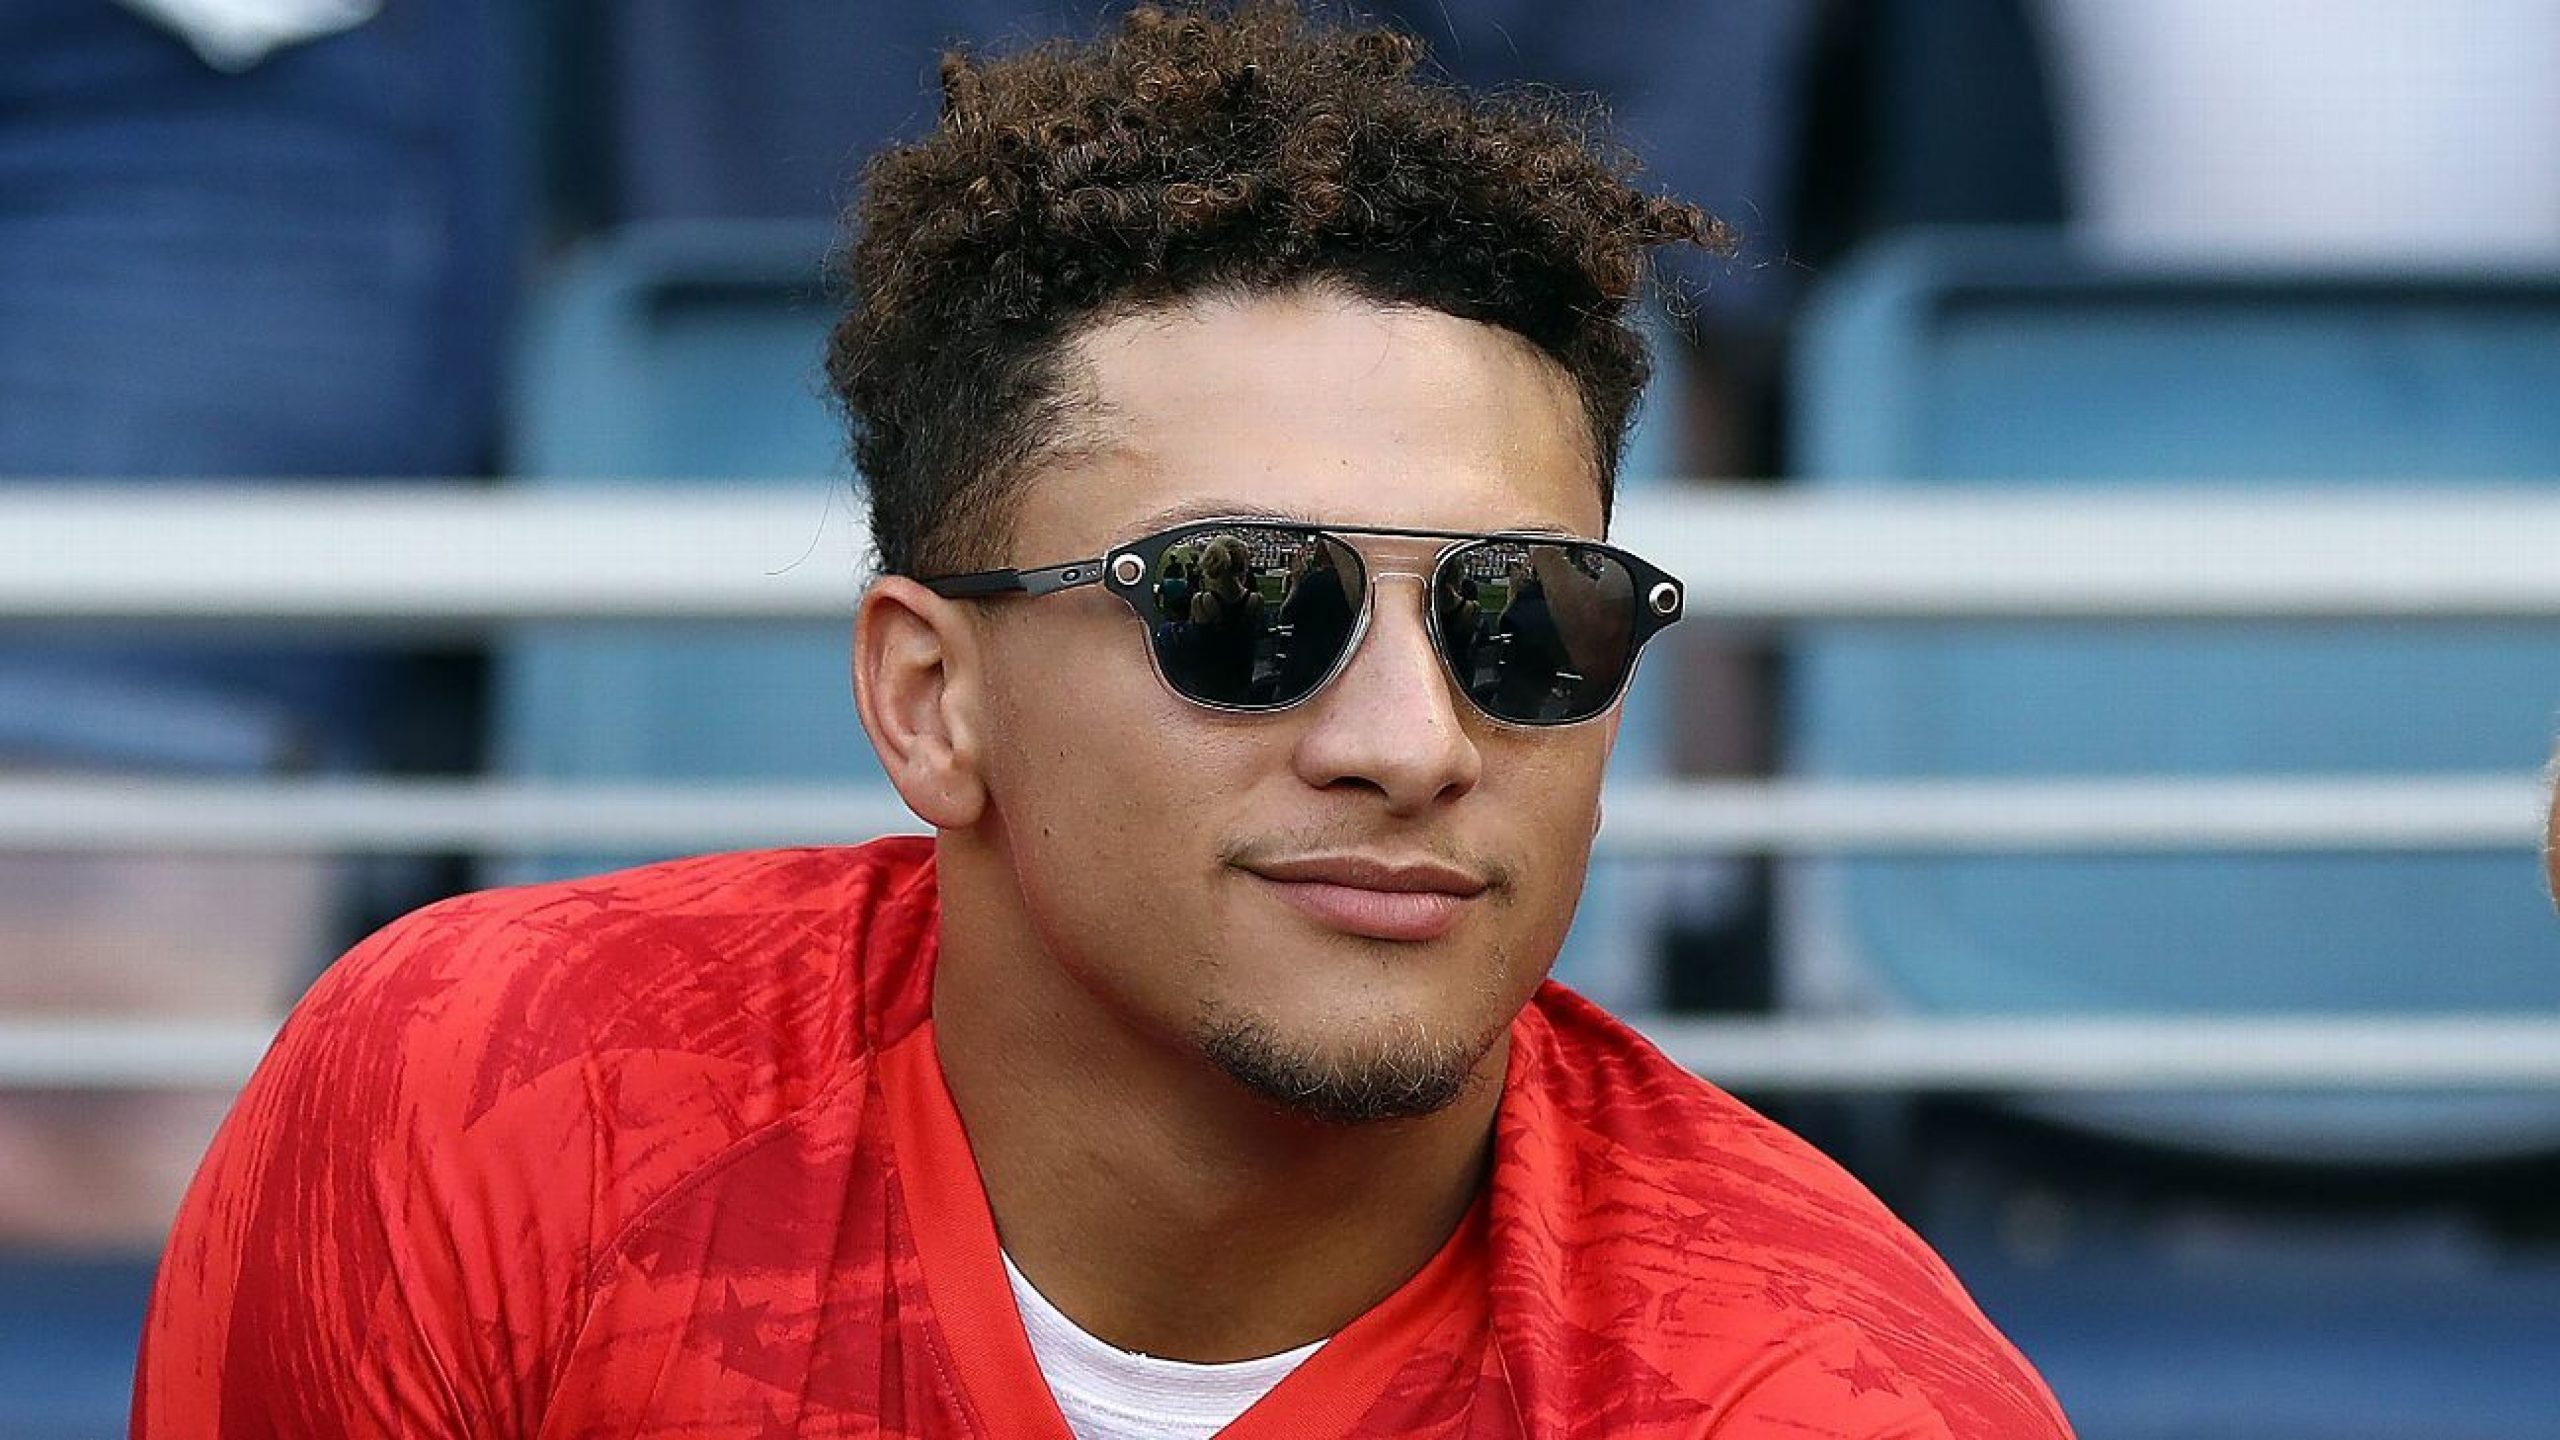 Mahomes follows LeBron, Durant, Reynolds and Ferrell into club ownership